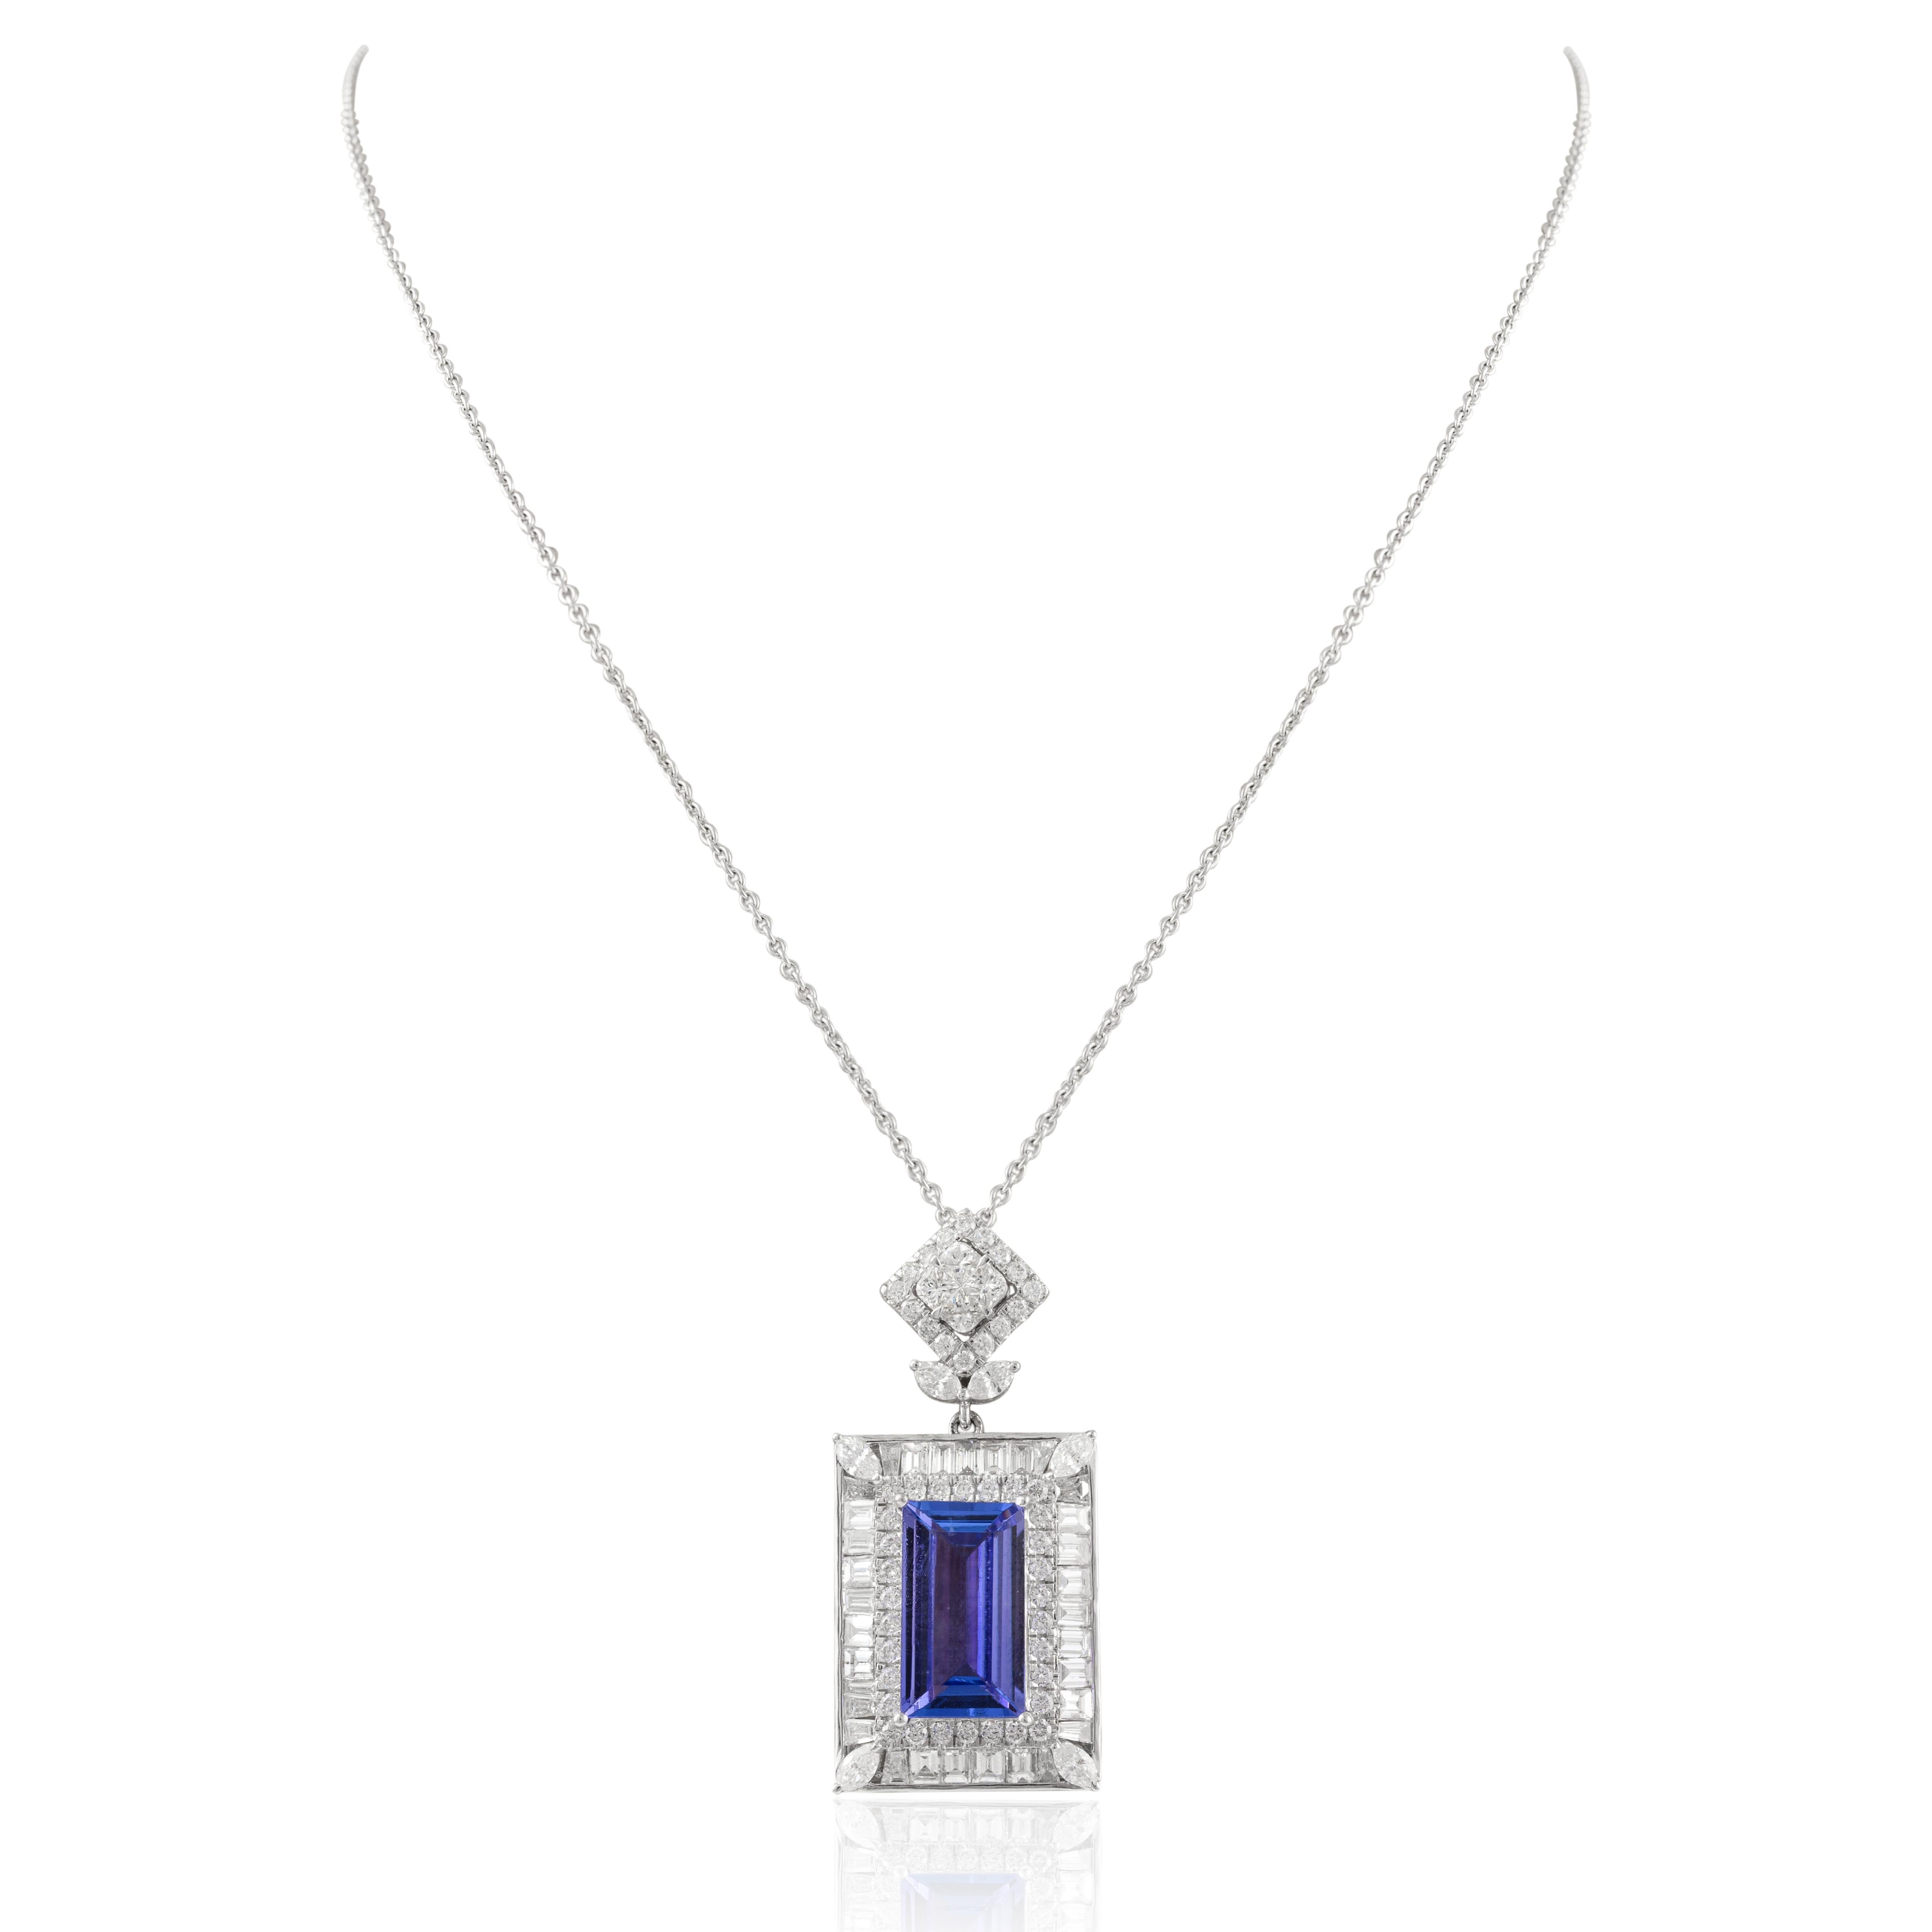 Statement Tanzanite Diamond Chain Necklace in 18K Gold studded with baguette cut tanzanite and round cut diamonds. This stunning piece of jewelry instantly elevates a casual look or dressy outfit. 
Tanzanite brings energy, calmness and happiness